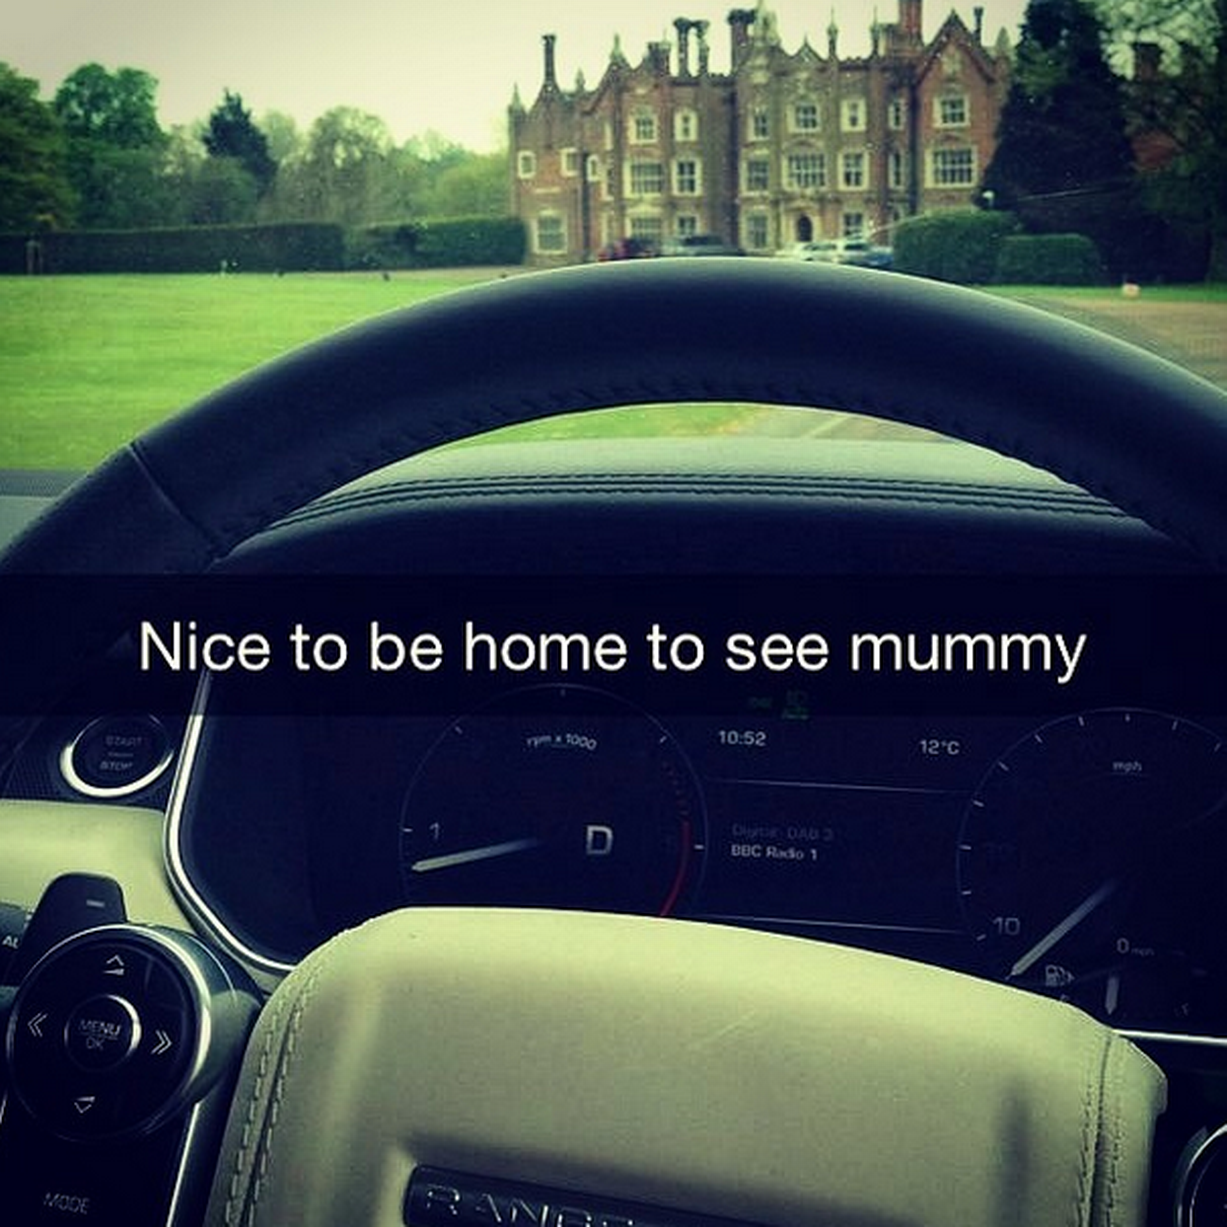 hate rich kids - In Bb Ebbe 09 Eb Lbb Nice to be home to see mummy